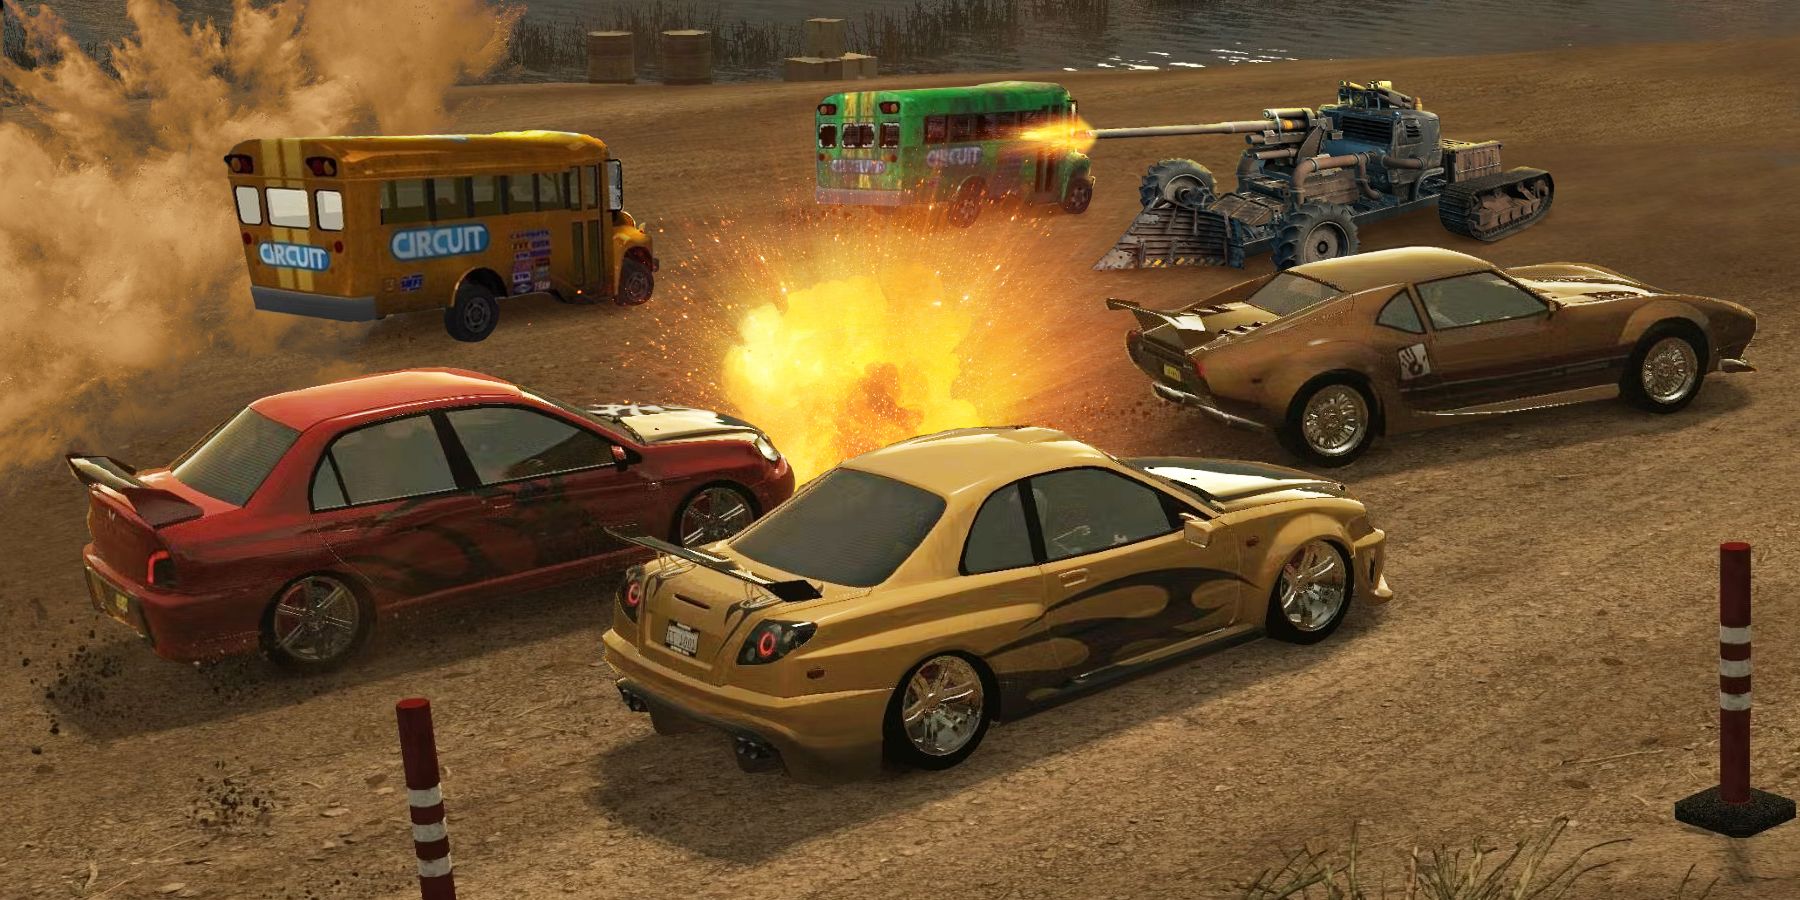 cars from Flatout: ultimate carnage, destruction derby 2, and Crossout meet in destruction! 